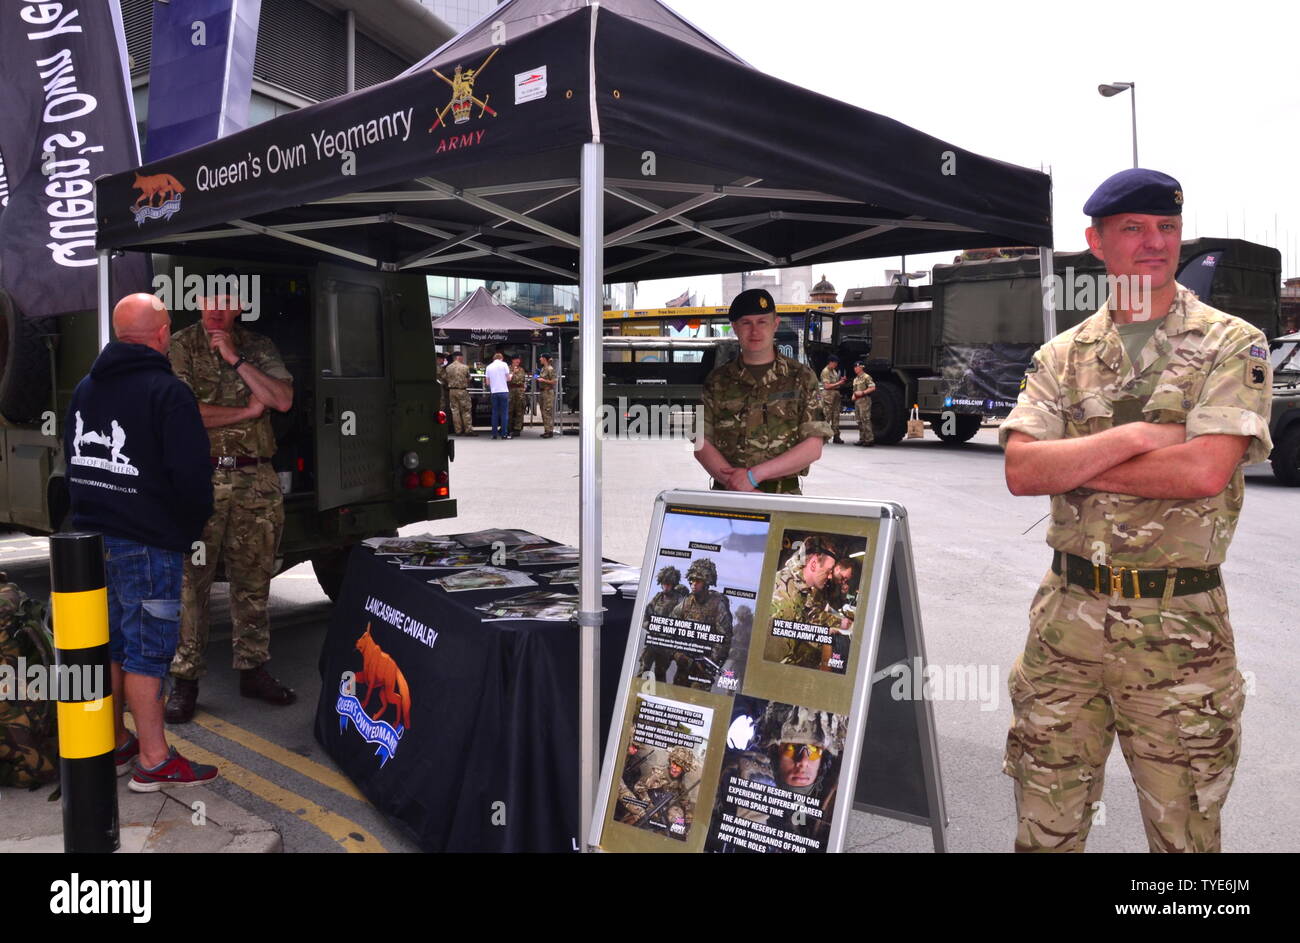 British Army Reserves Recruitment day at Piccadilly Station, Manchester, uk. The Queen's Own Yeomanry stall. Stock Photo